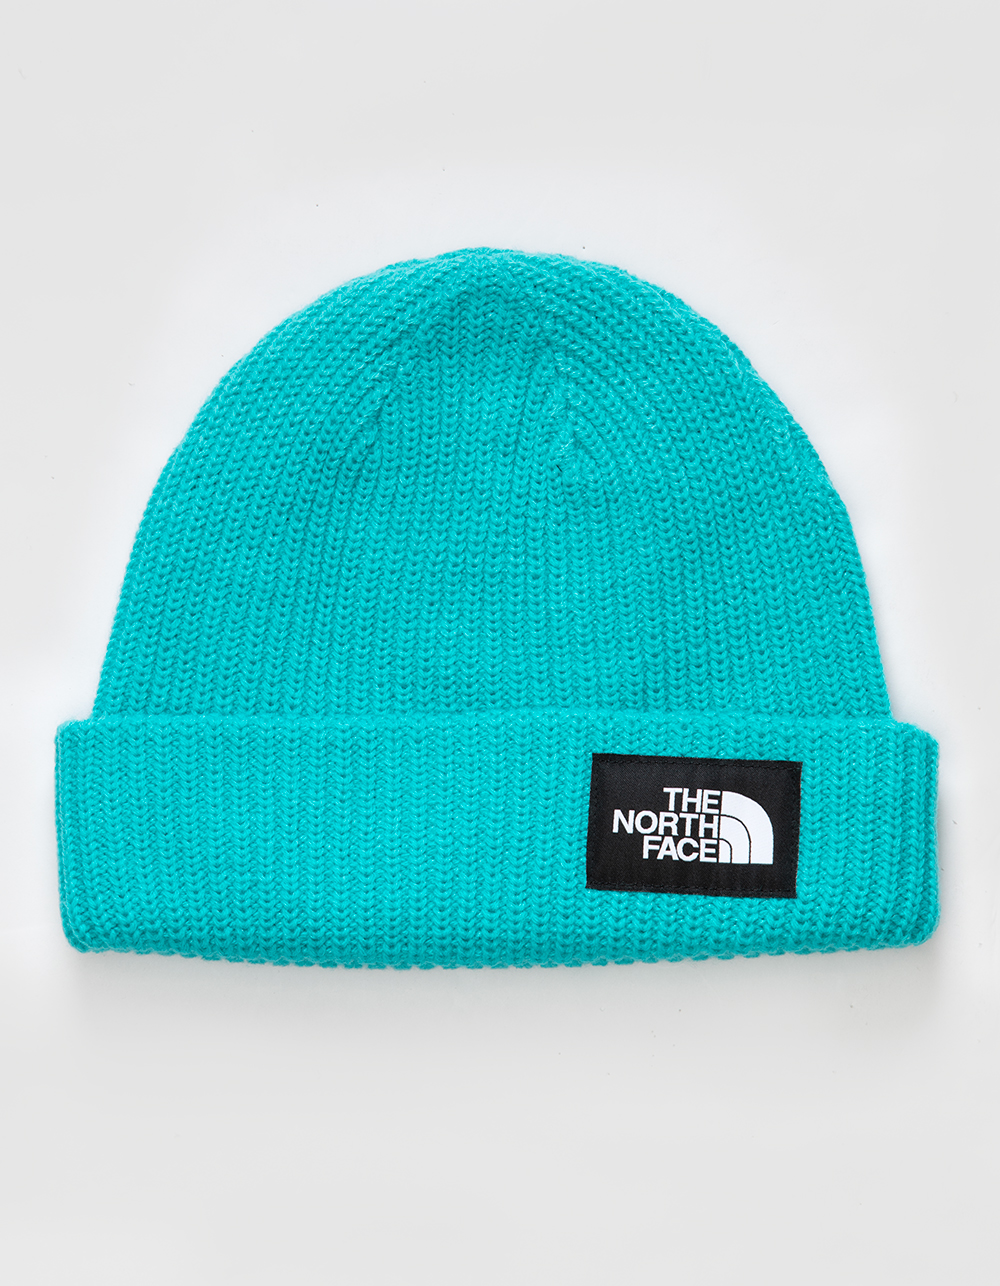 THE NORTH FACE Salty Beanie